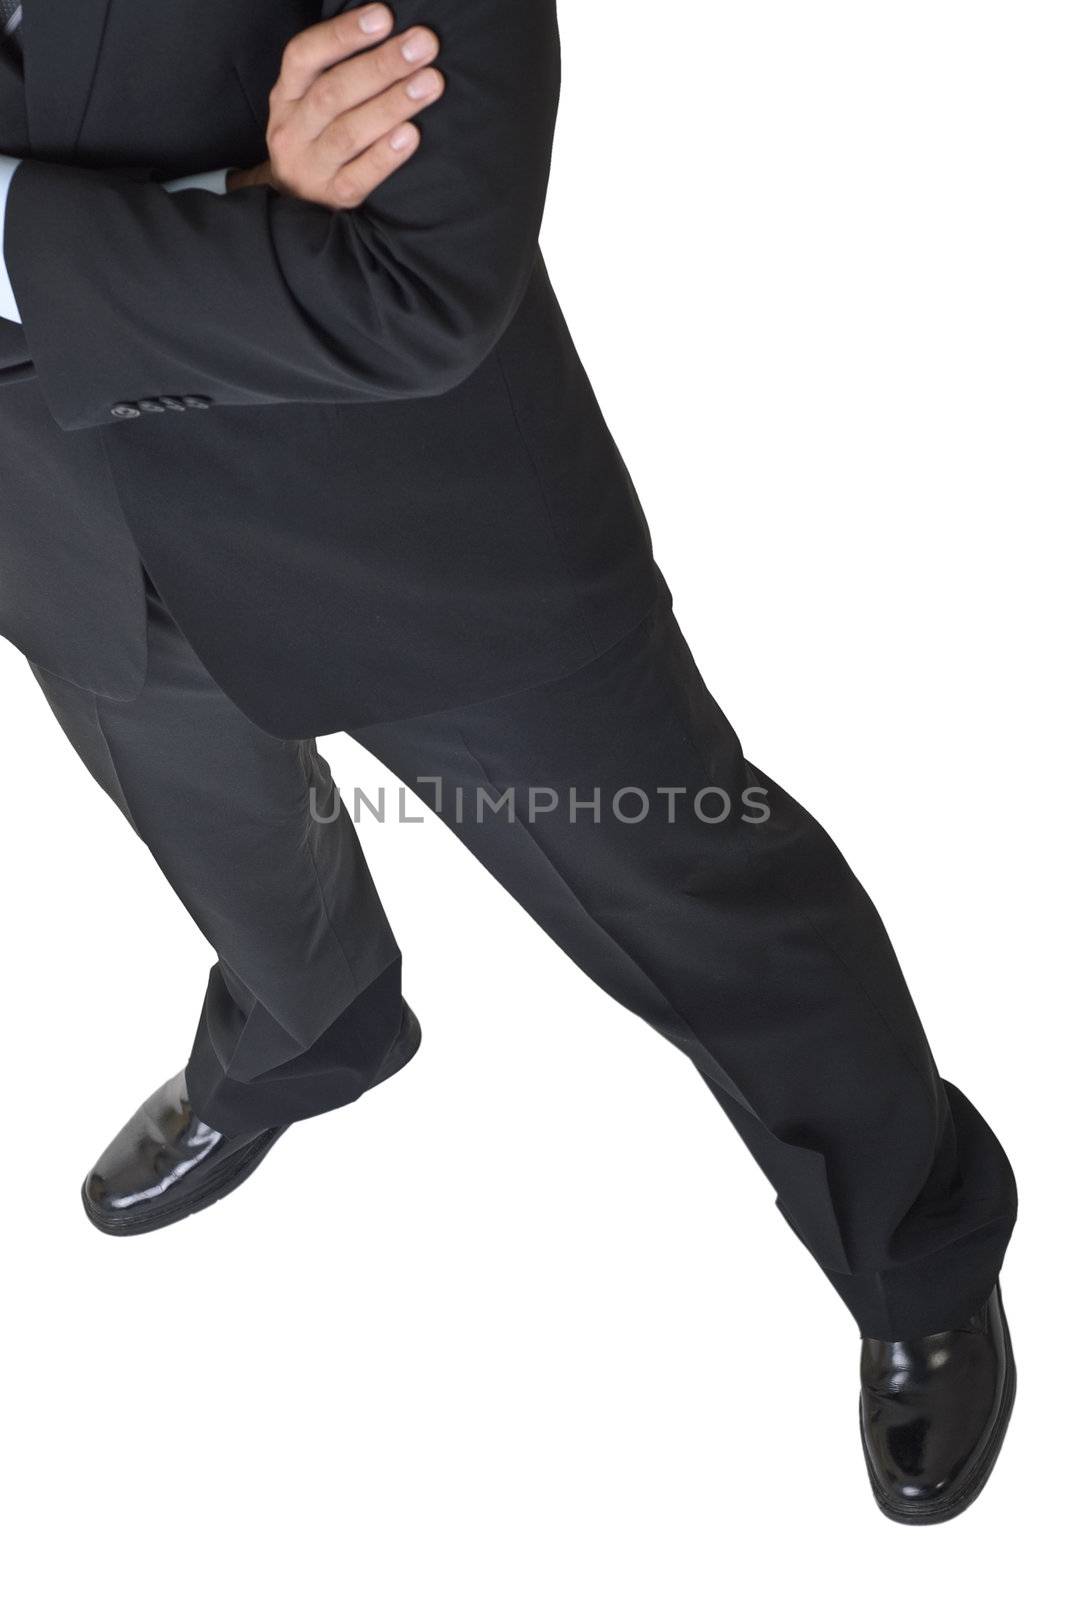 Leg of business man body isolated on white background.